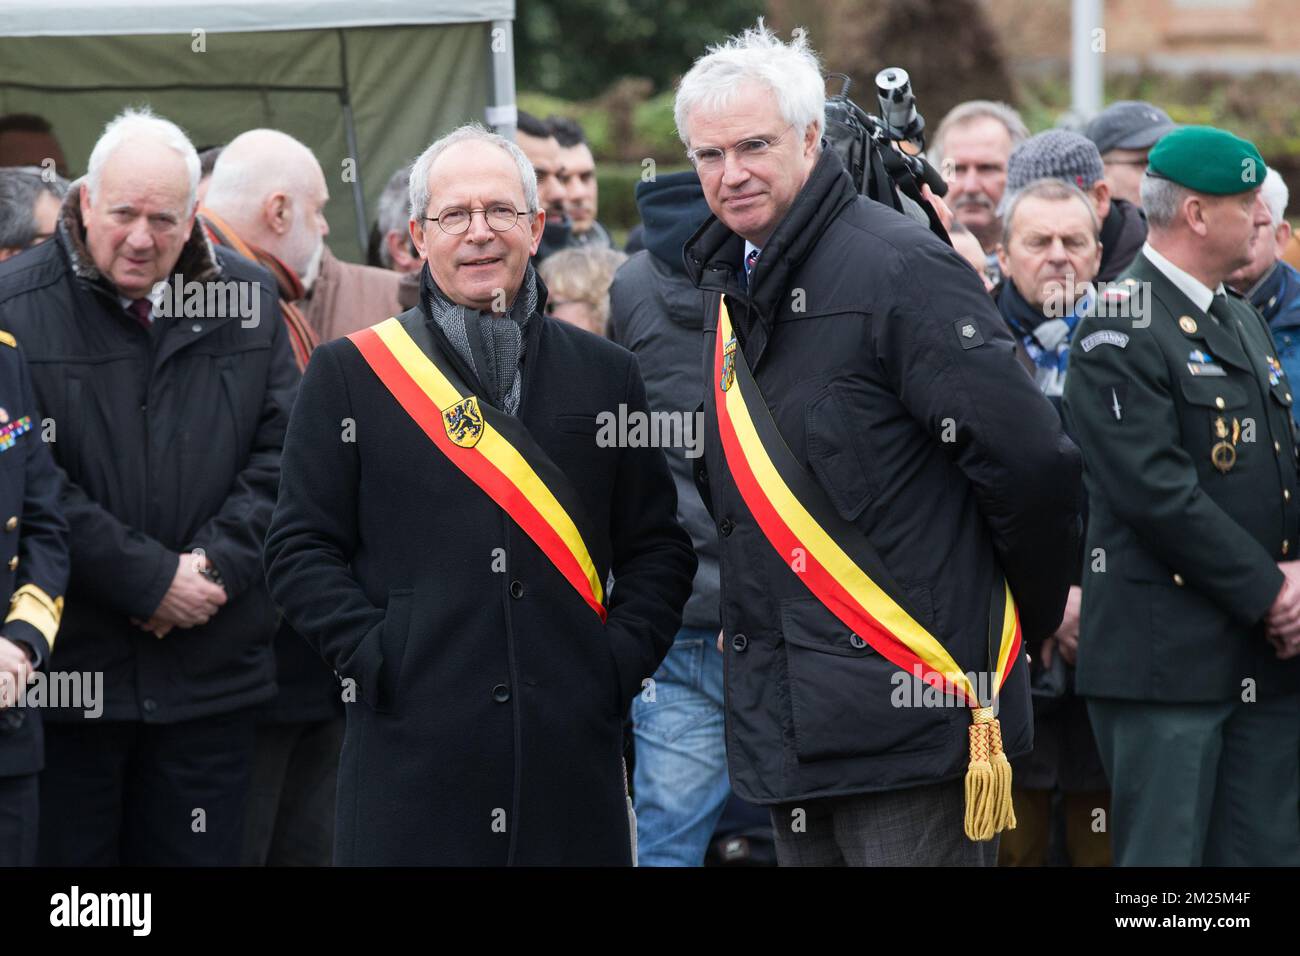 Brugge's Mayor Renaat Landuyt and West-Flanders province governor Carl Decaluwe pictured during a tribute ceremony for the 30th anniversary of the Herald of Free Enterprise ferry disaster, on Monday 06 March 2017 in Zeebrugge. On 6 March 1987 the ferry left the harbor of Zeebrugge, bound for Dover with more than 450 passengers and 80 crew members on board. It capsized just outside the harbor. The disaster, which was caused by the failure to close the bow doors, cost the life of 194 people. BELGA PHOTO KURT DESPLENTER Stock Photo